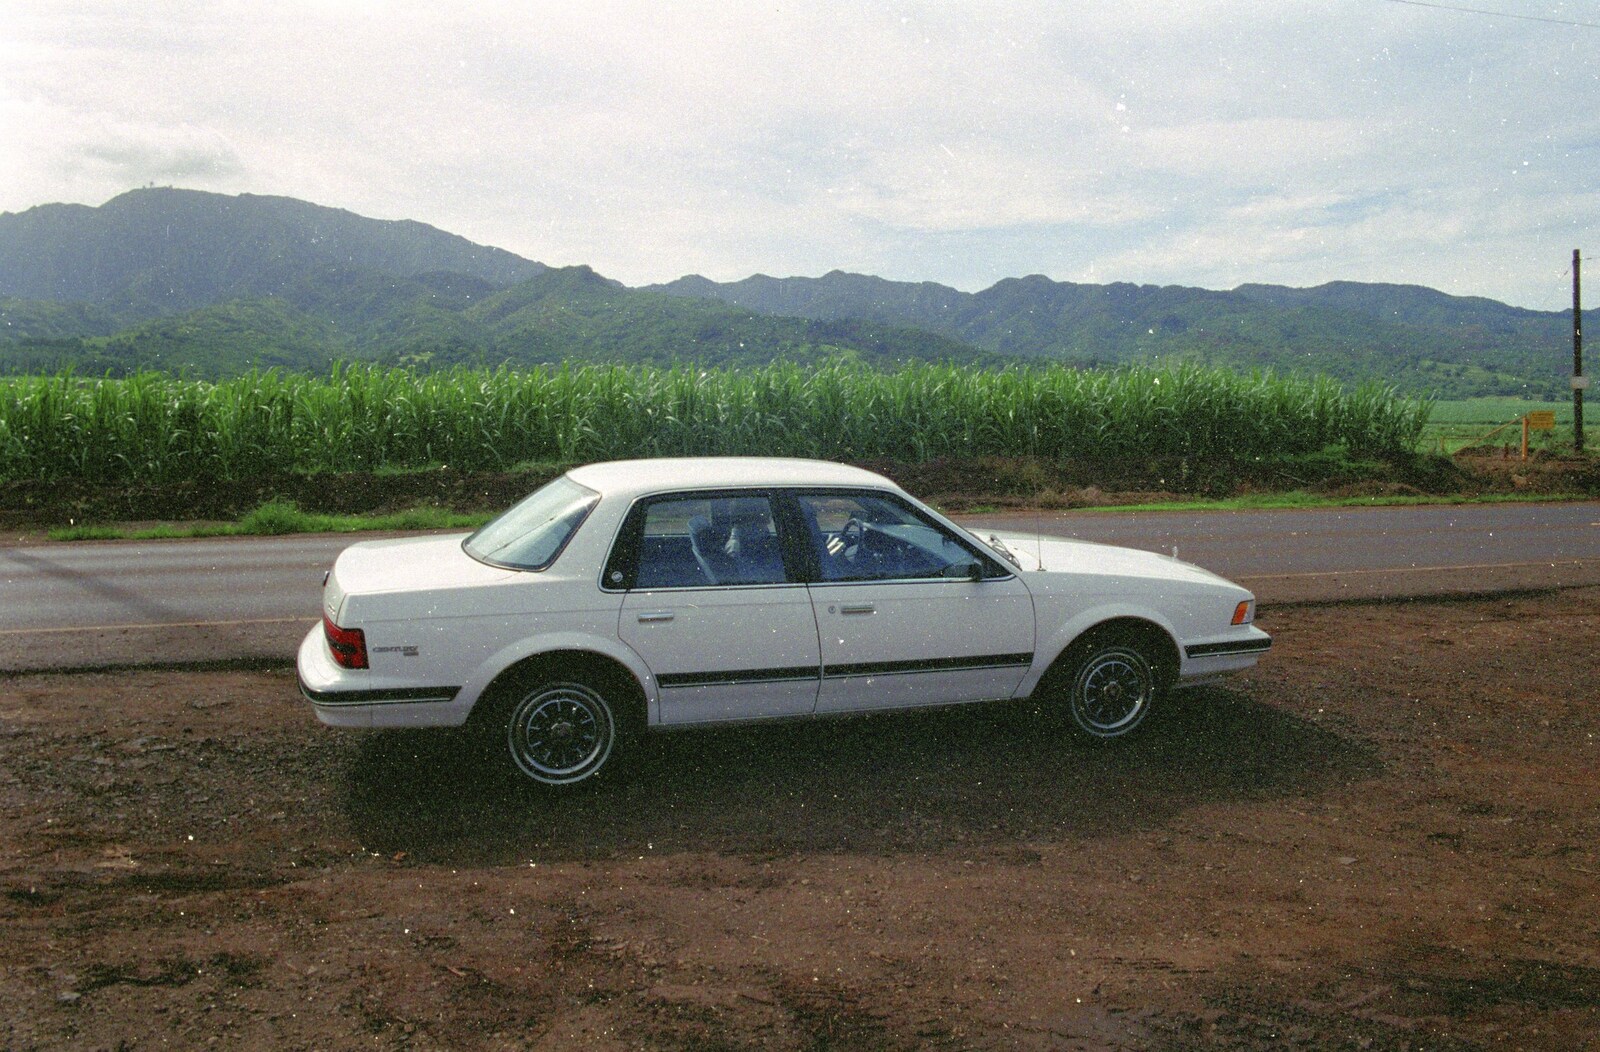 The hire car, out and about on O'ahu from A 747 Cockpit, Honolulu and Pearl Harbor, O'ahu, Hawai'i, United States - 20th November 1992